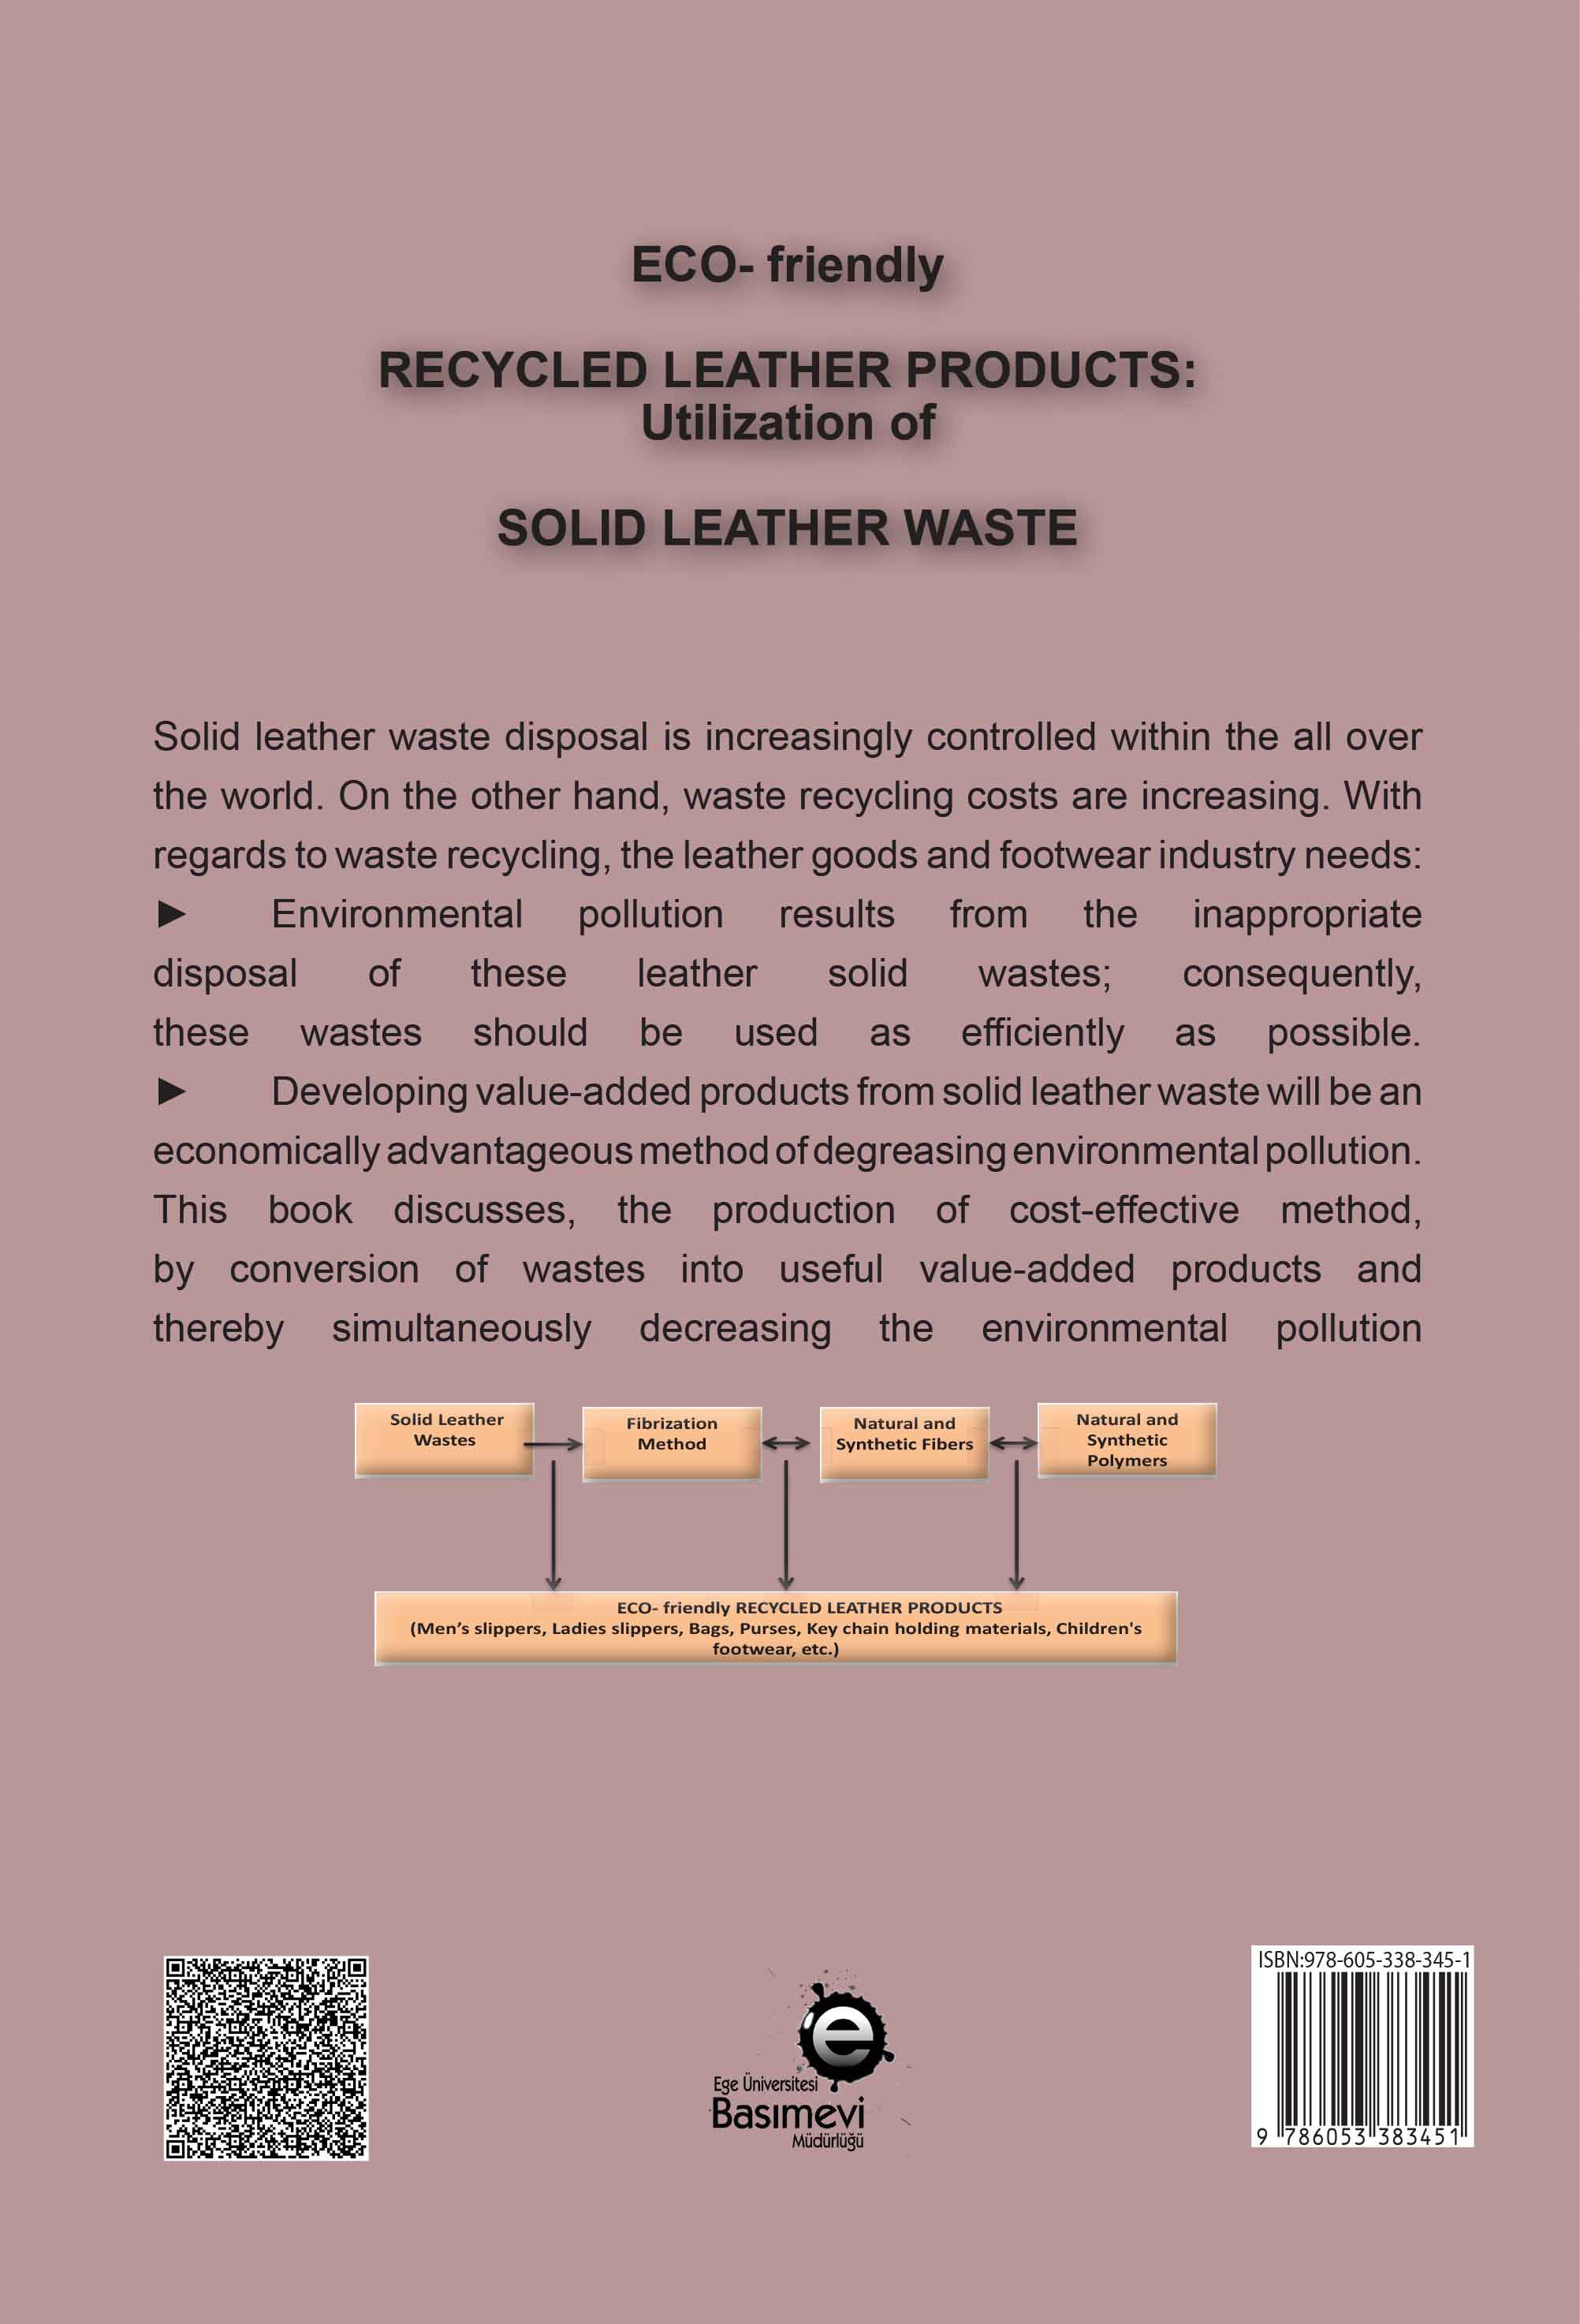 ECO-Frendly Recycled Leather Products: Utilization of Solid Leather Waste